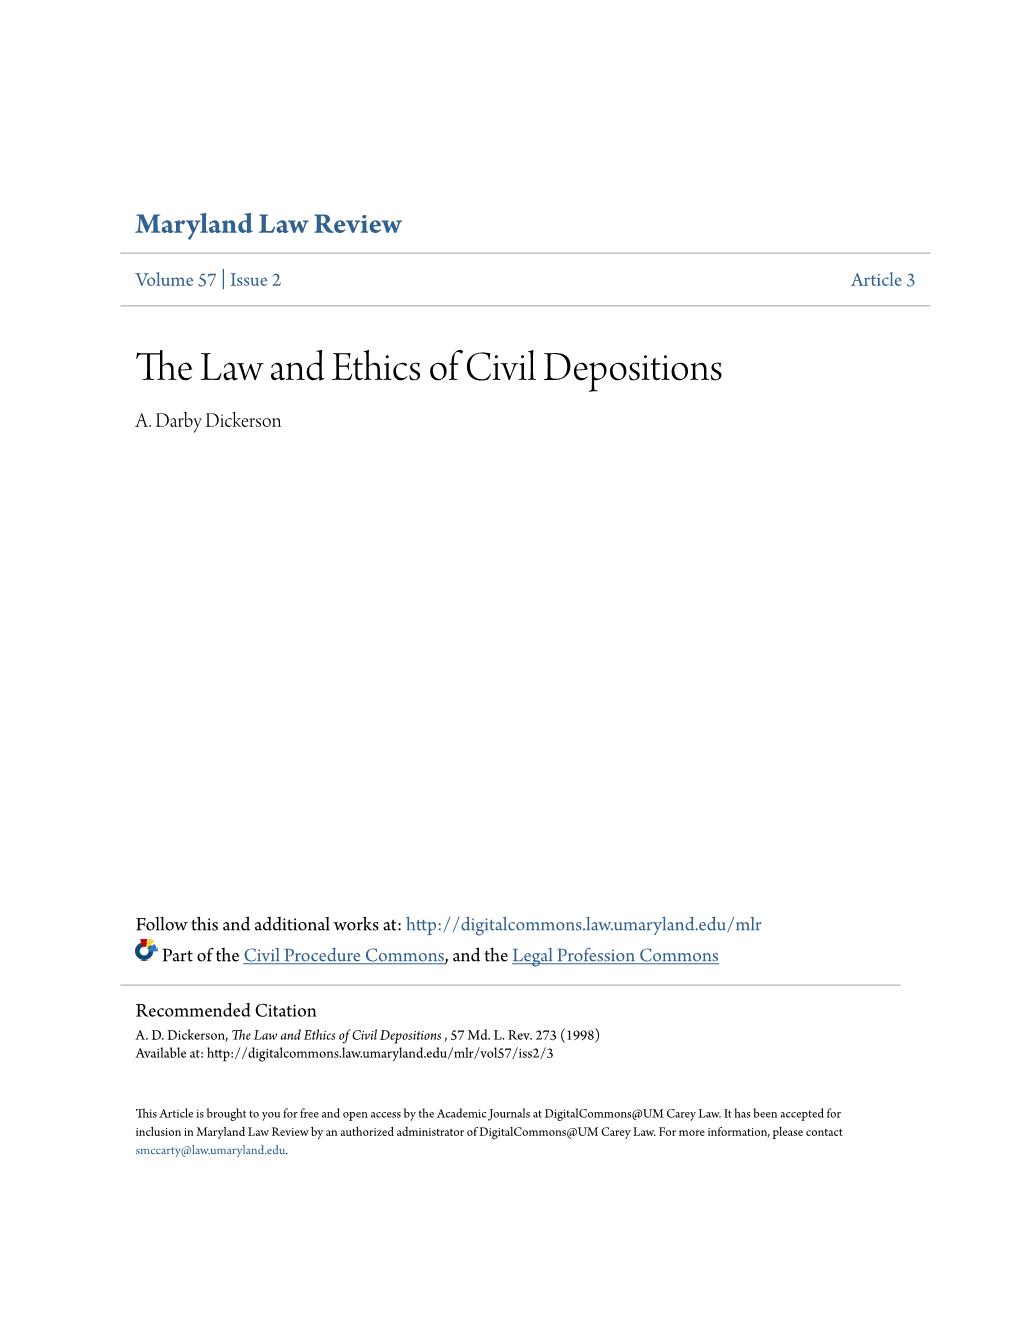 The Law and Ethics of Civil Depositions A